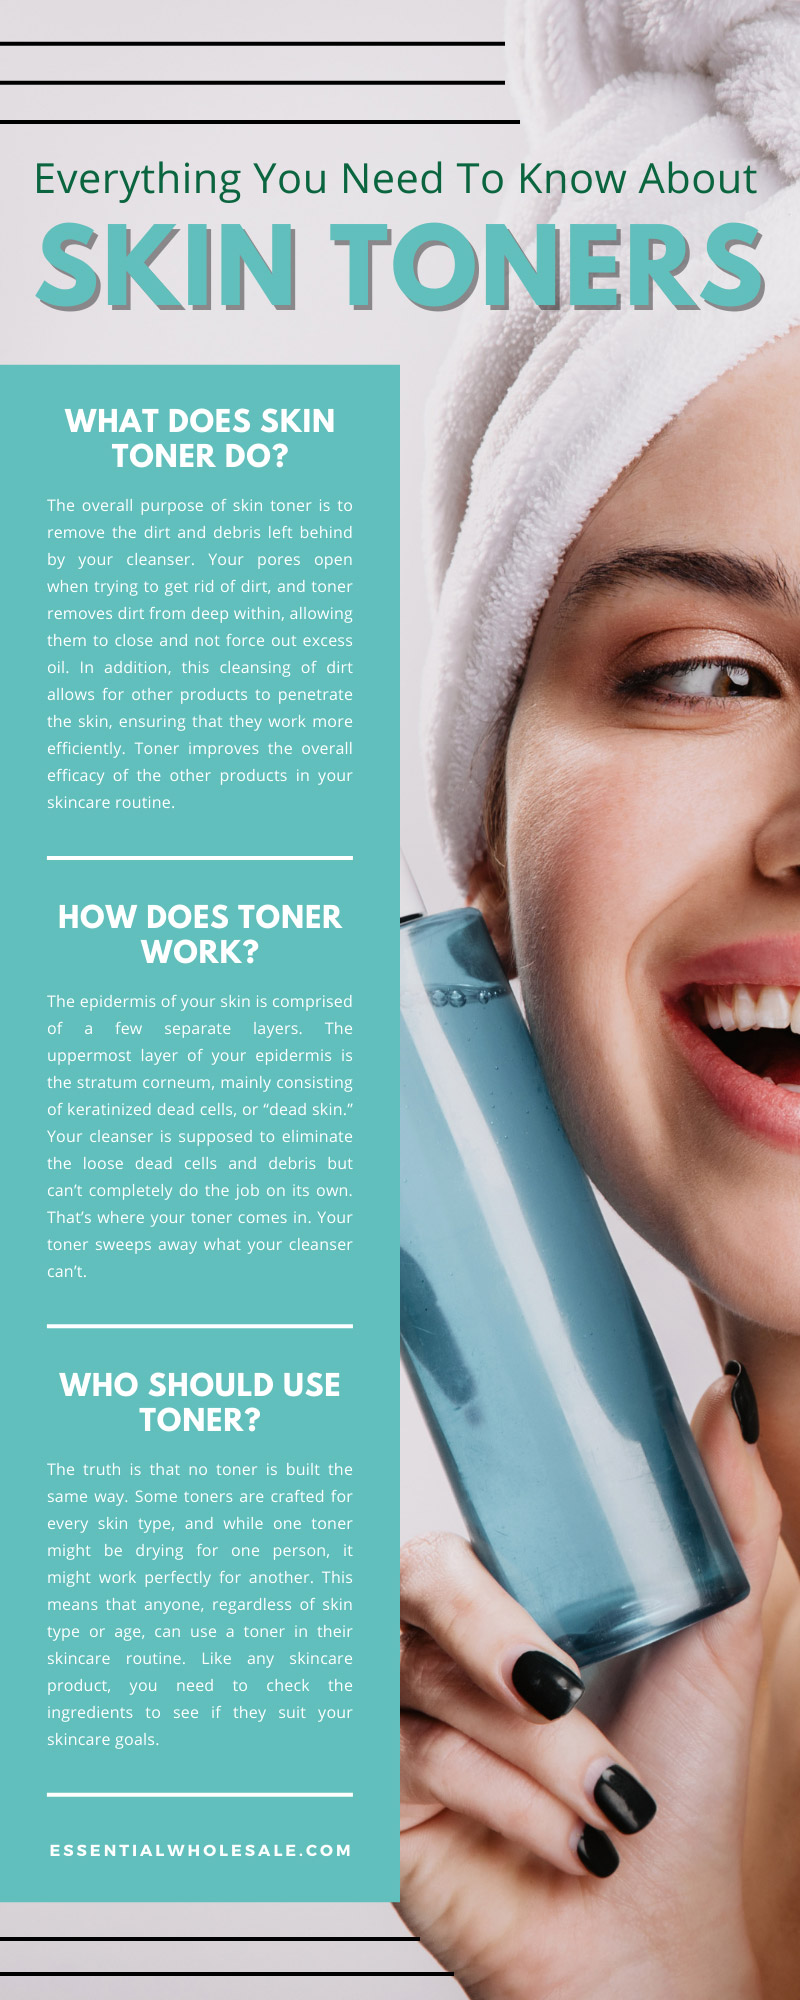 Everything You Need To Know About Skin Toners